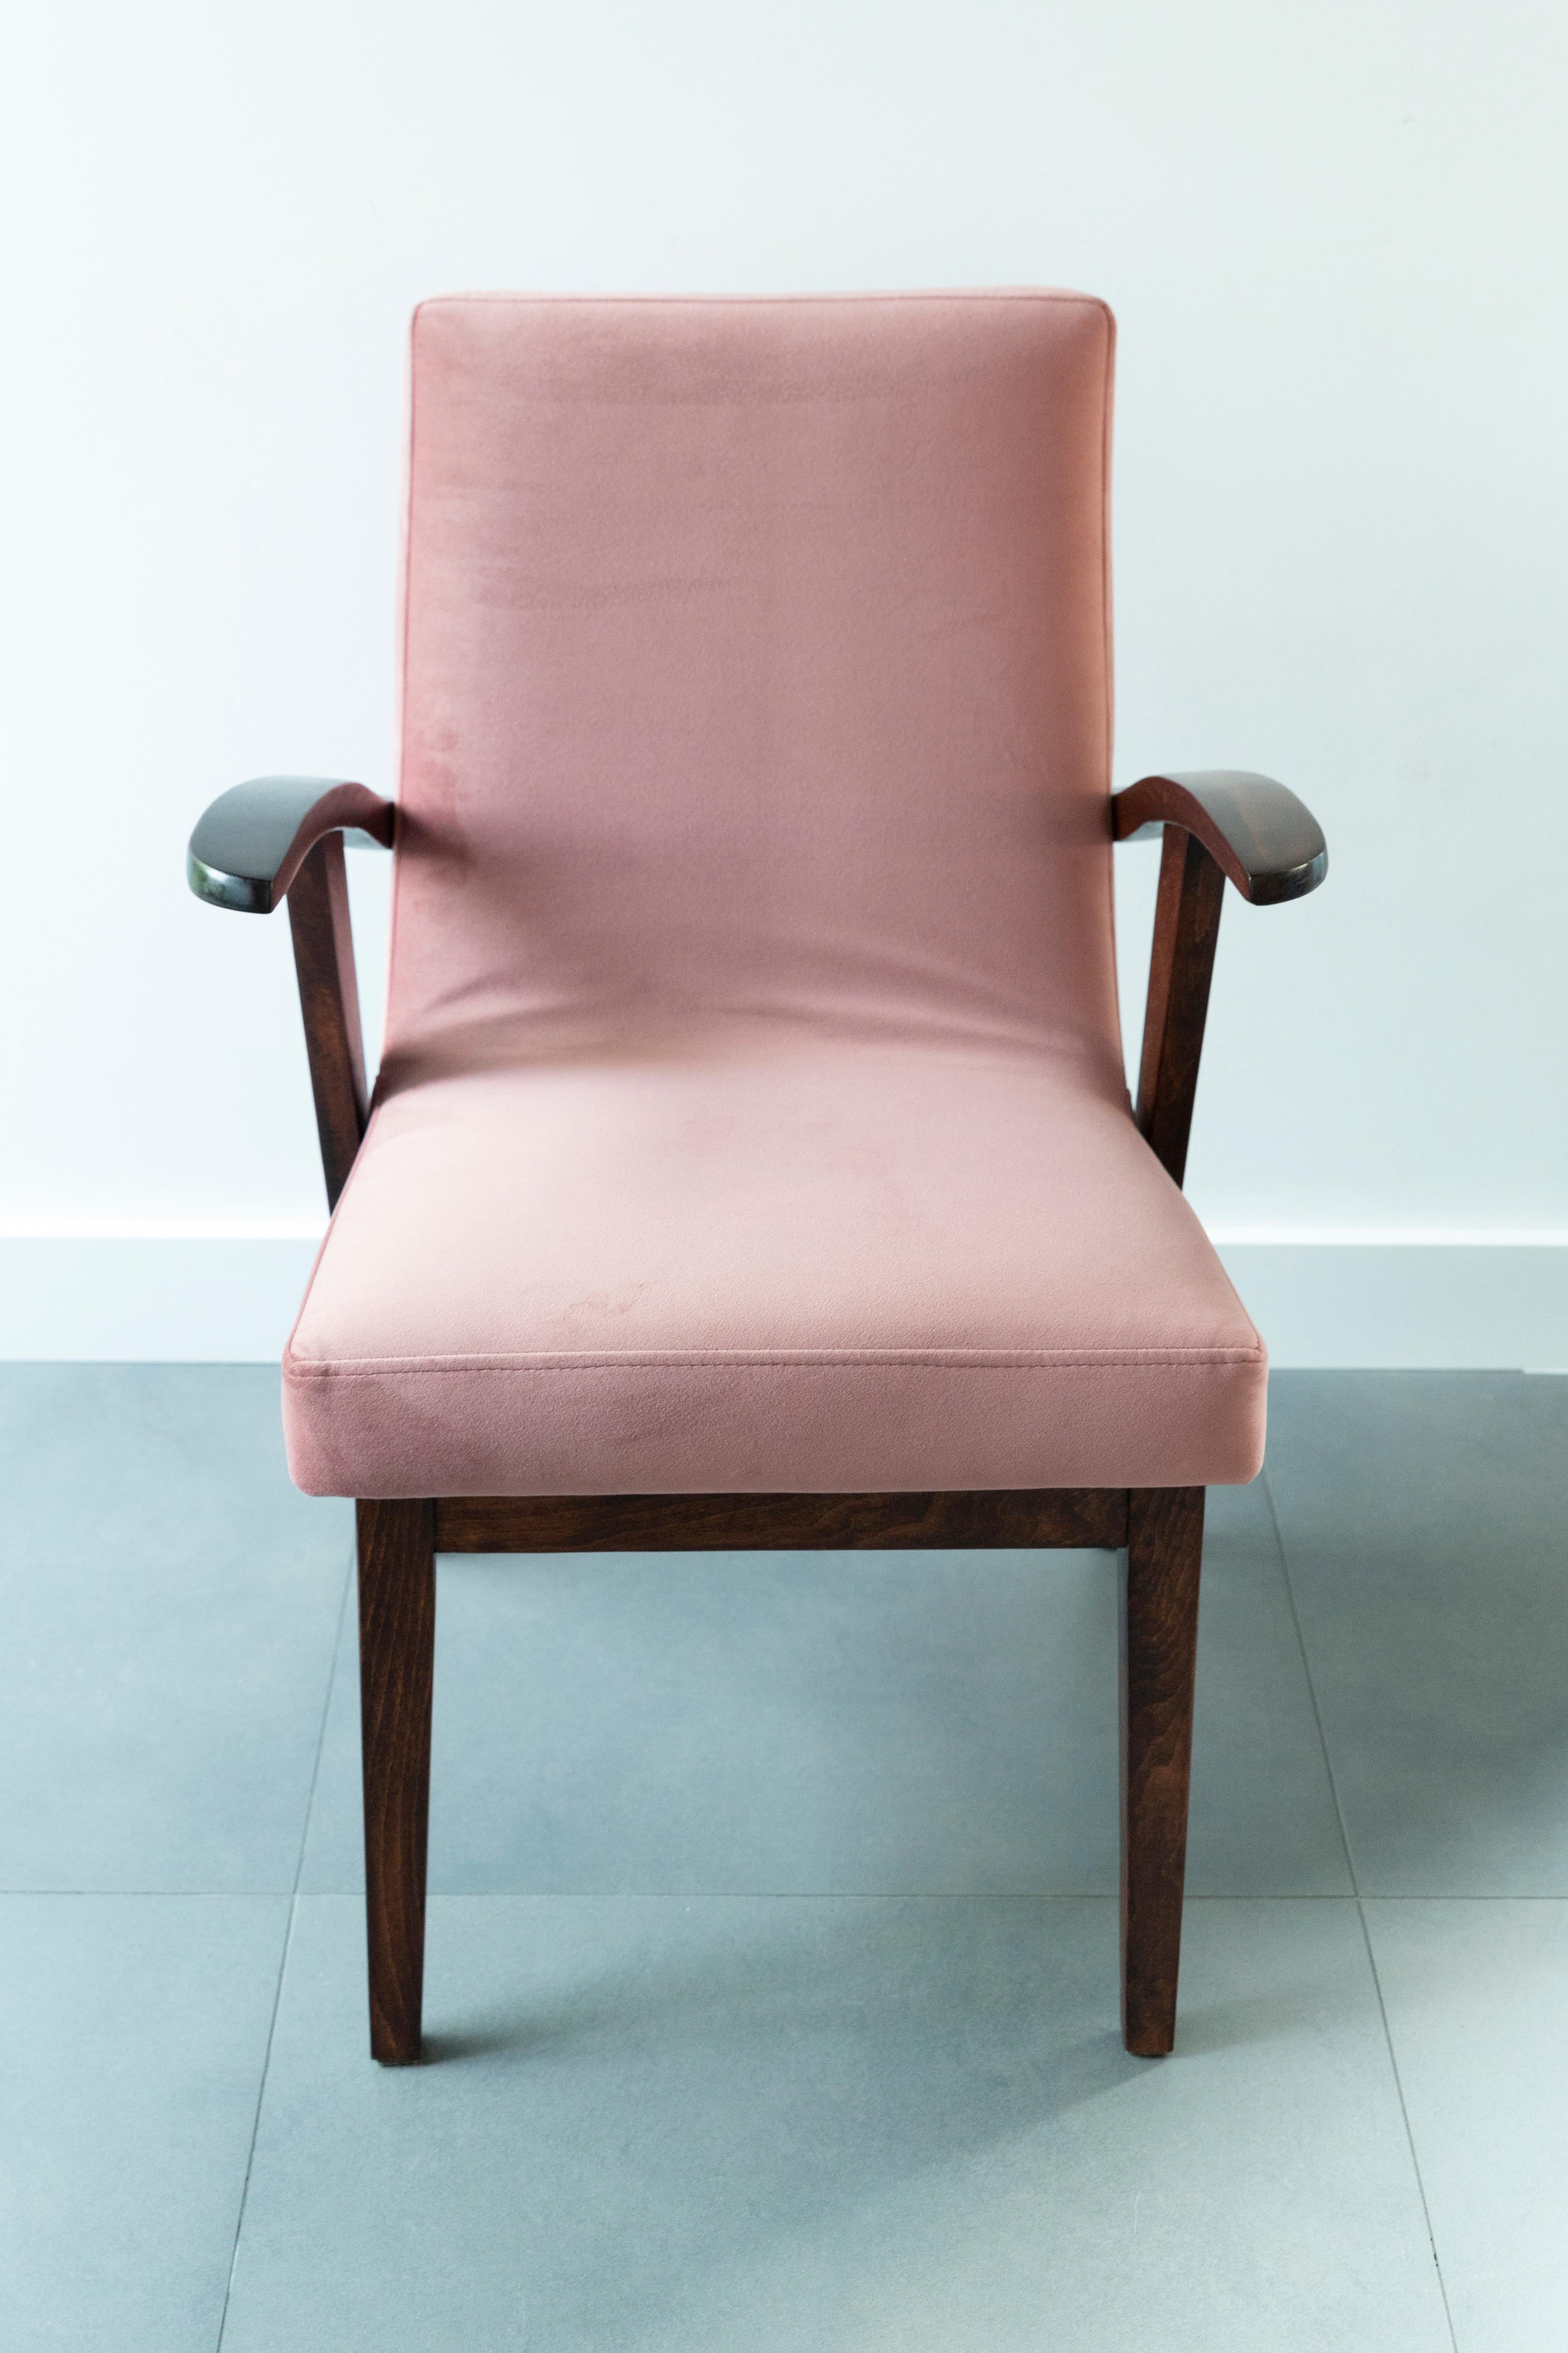 20th Century Vintage Armchair in Dusty Pink Velvet by Mieczyslaw Puchala, 1960s For Sale 1